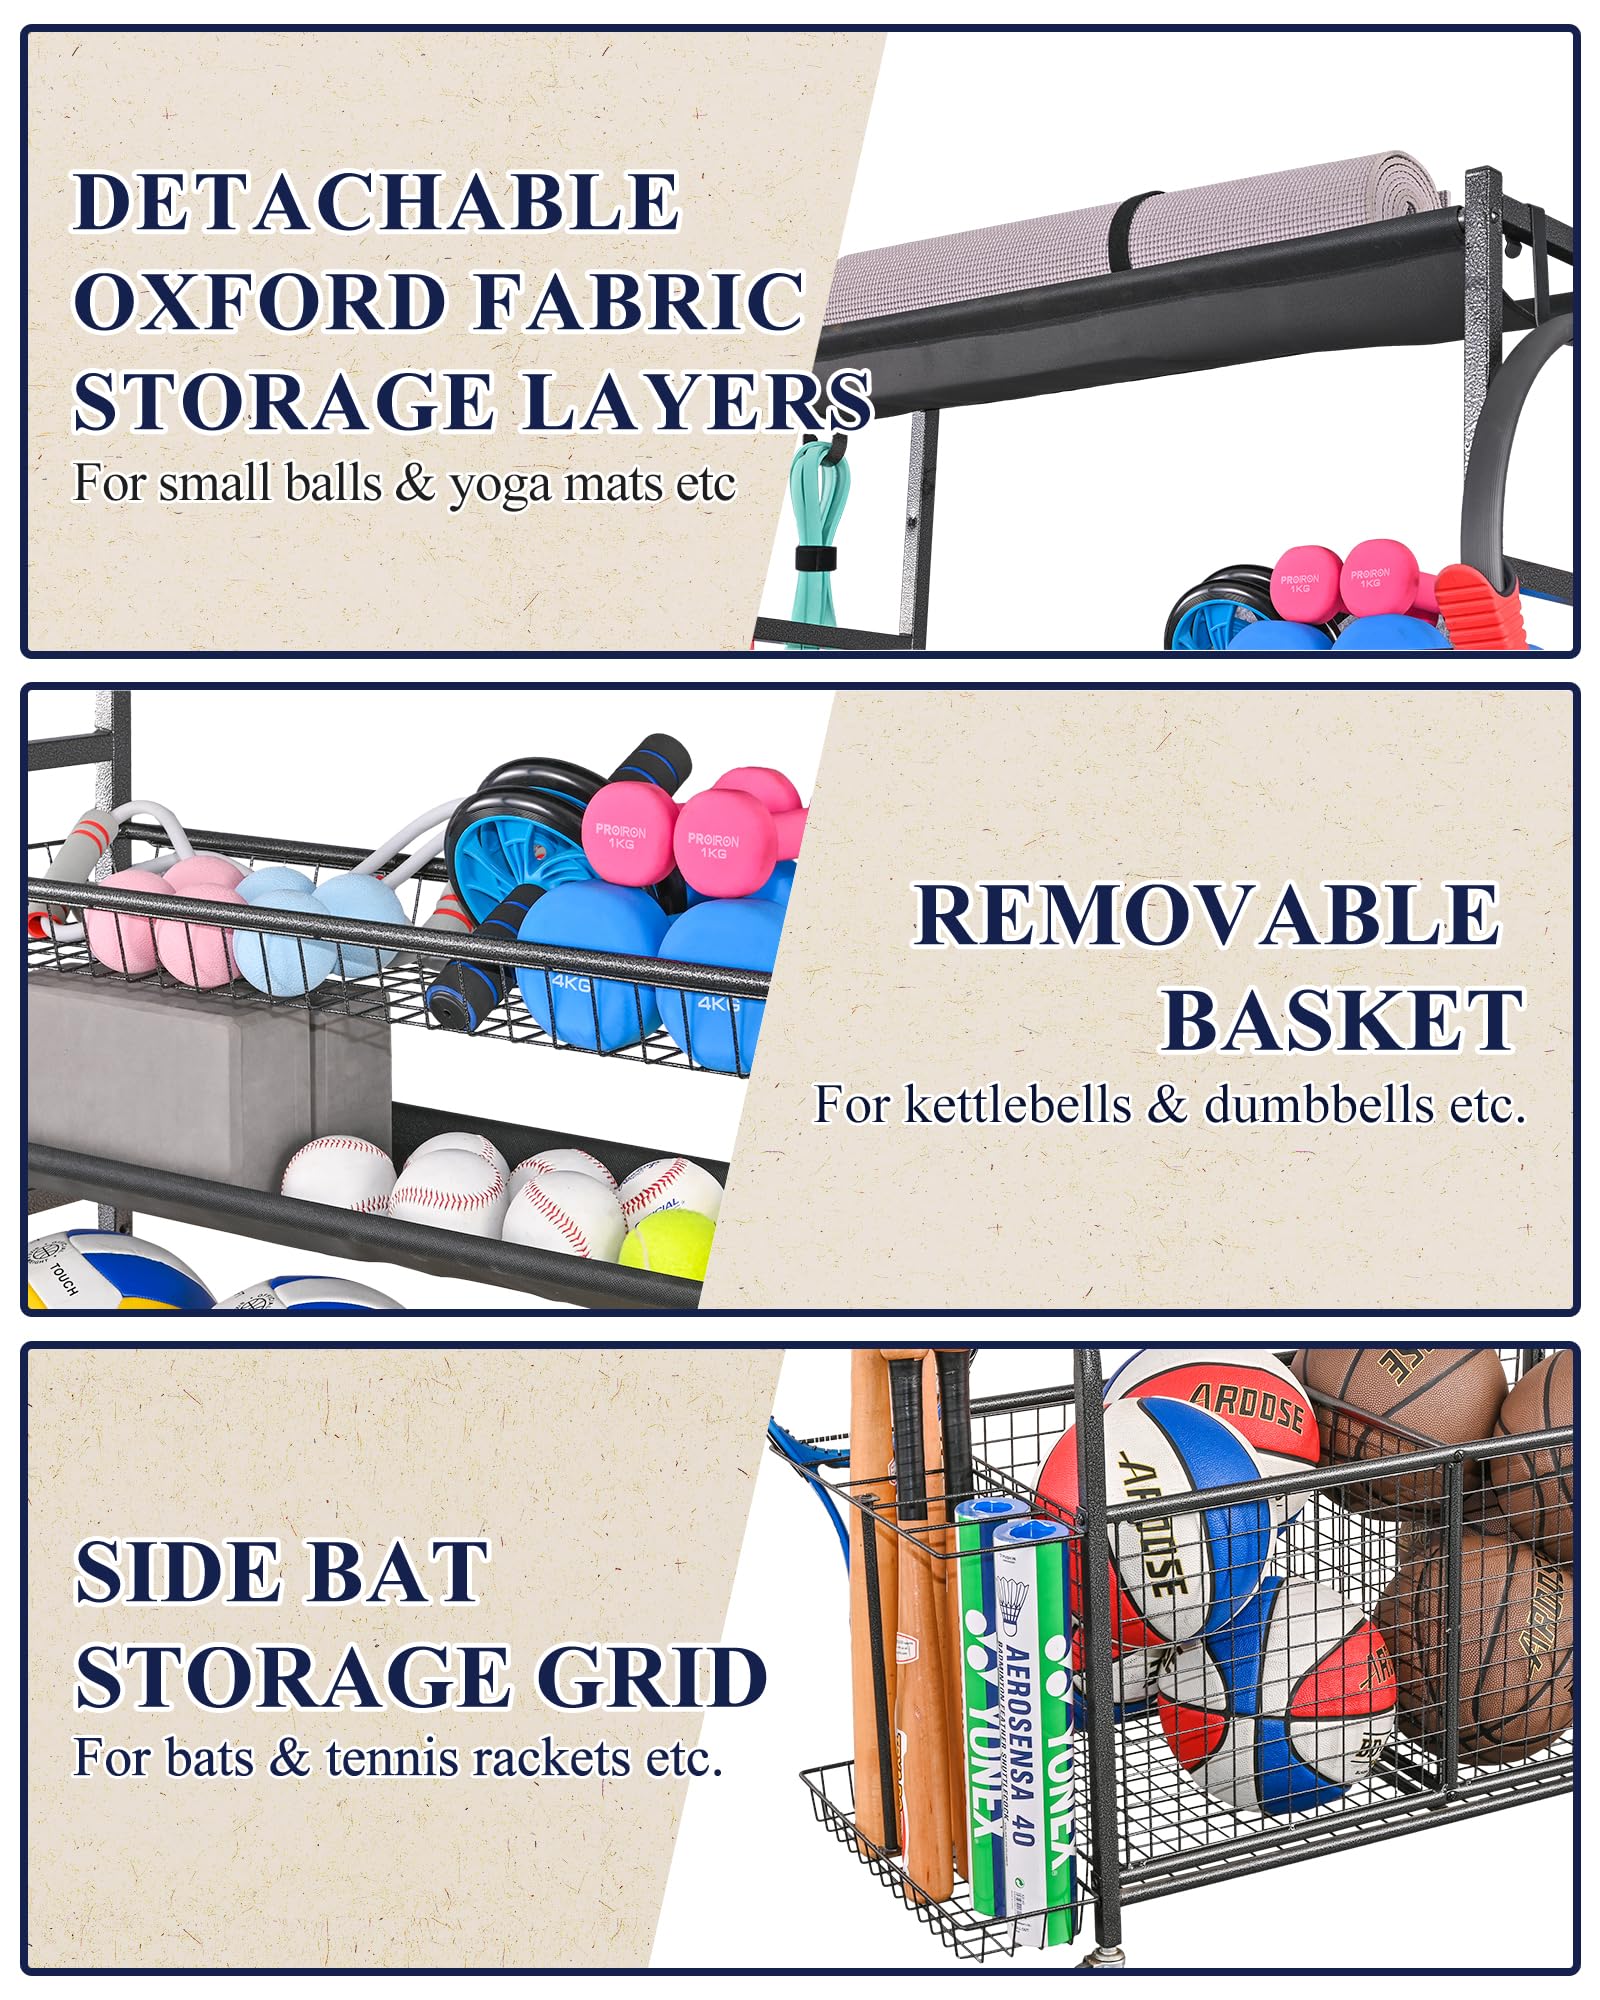 Mythinglogic Sports Equipment Garage Organizer,Garage Ball Storage for Sports Gear and Toys, Rolling Ball Cart with Wheels for Indoor/Outdoor Use